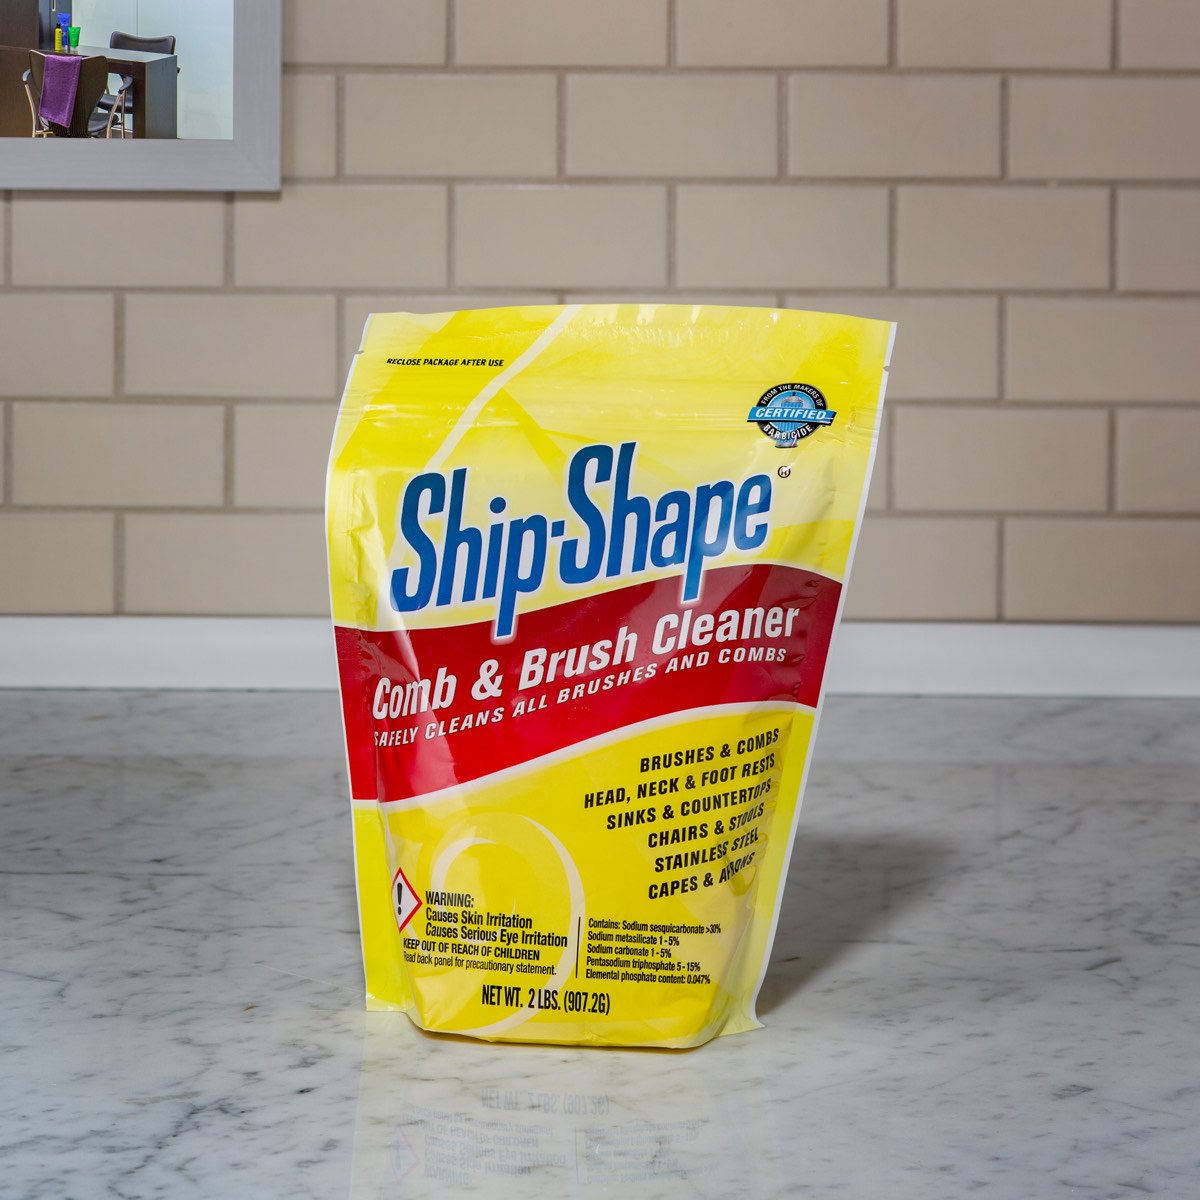 How to Clean & Disinfect Your Tools Using Ship-Shape & BARBICIDE® 